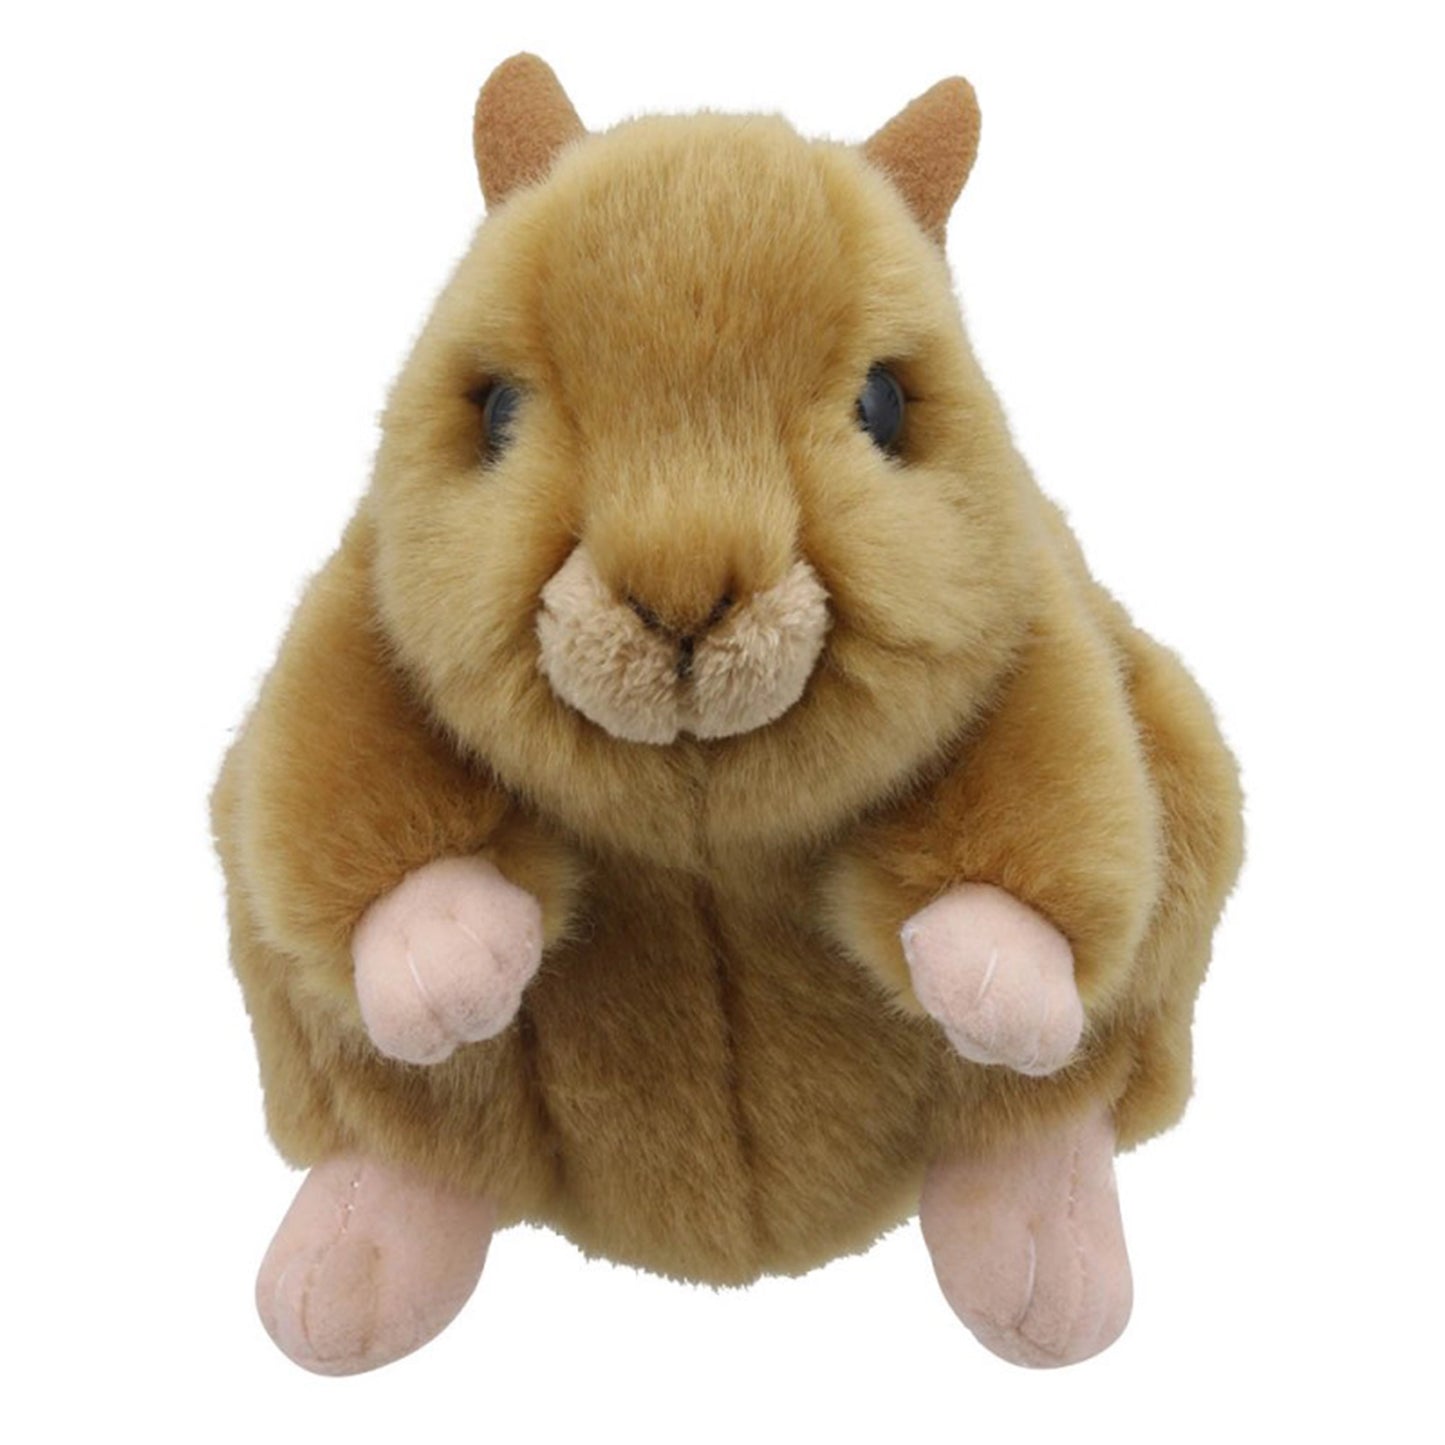 Wilberry Mini's Hamster - Wilberry Toys - The Forgotten Toy Shop